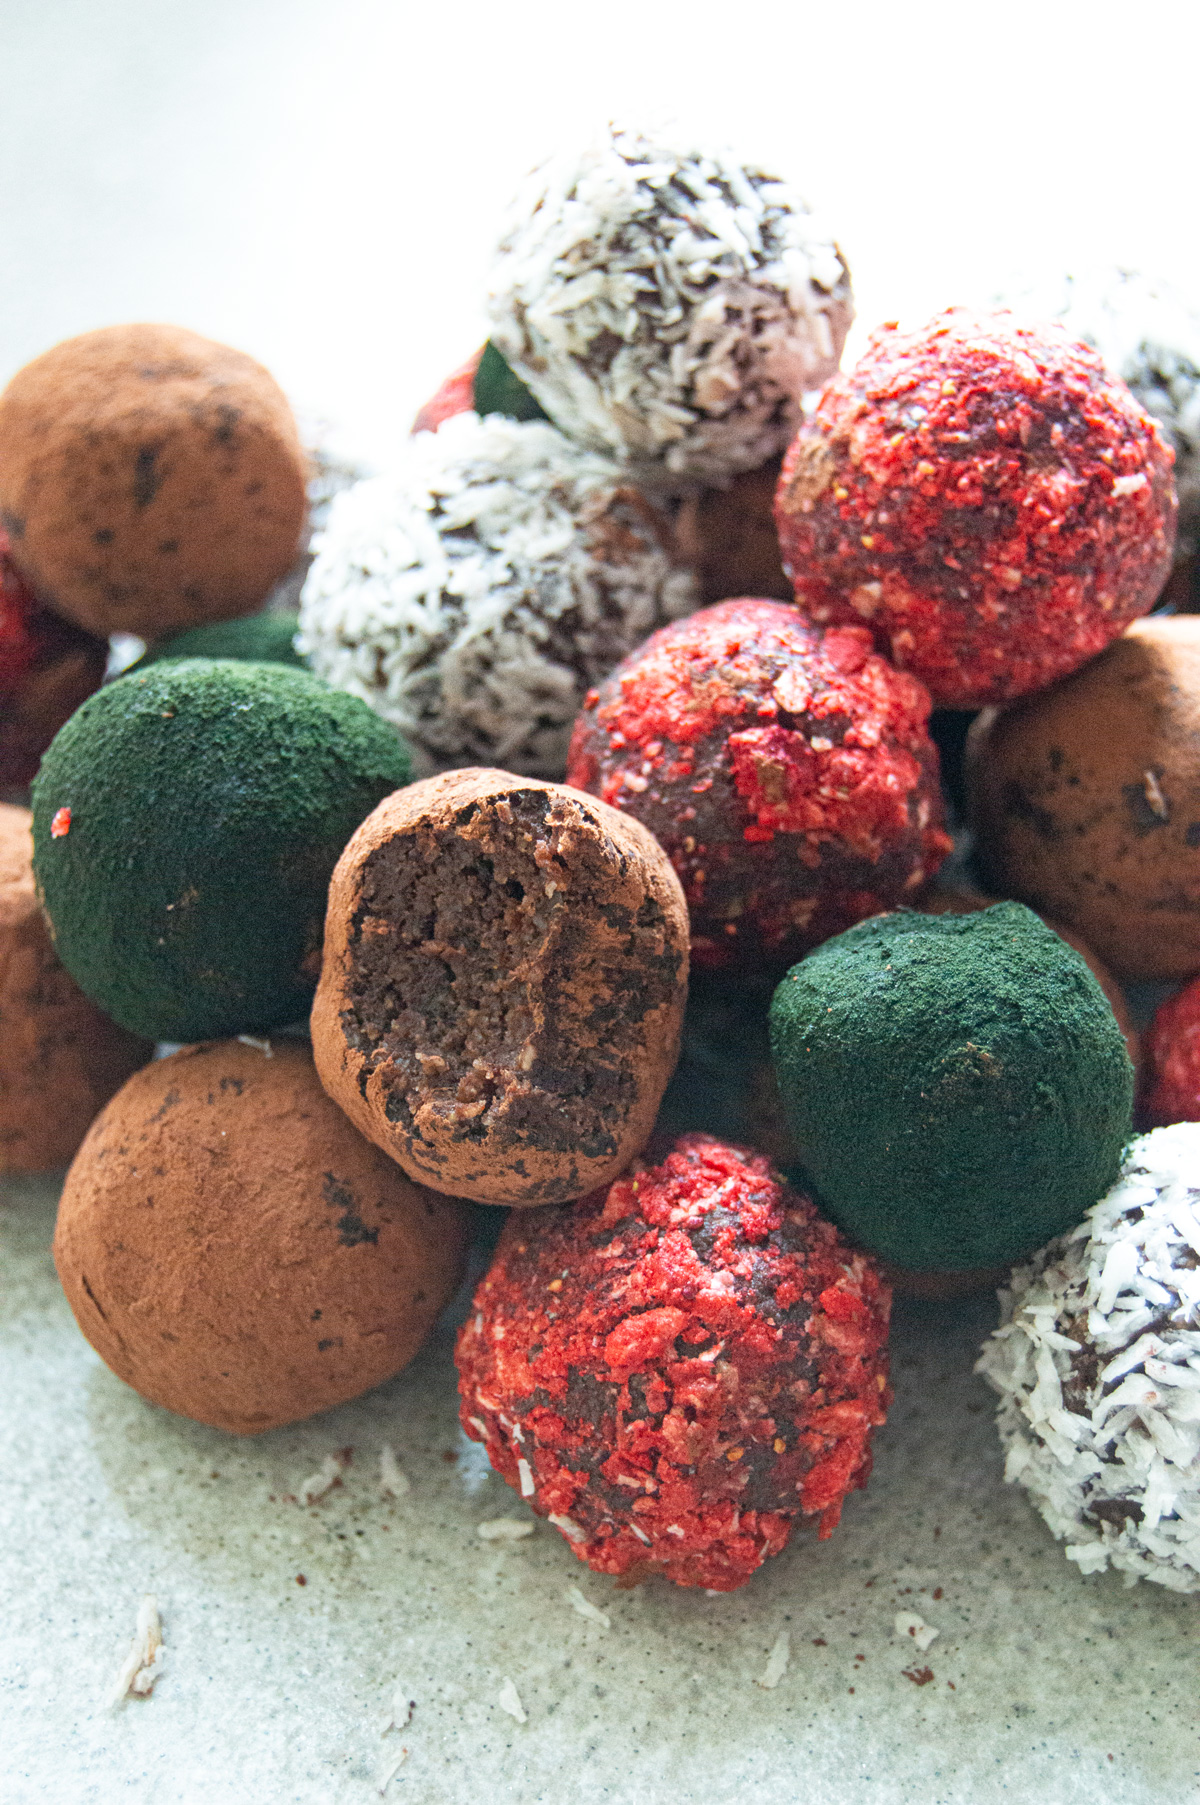 Sunflower Seed, Nuts, Cacao & Fruit Energy Balls